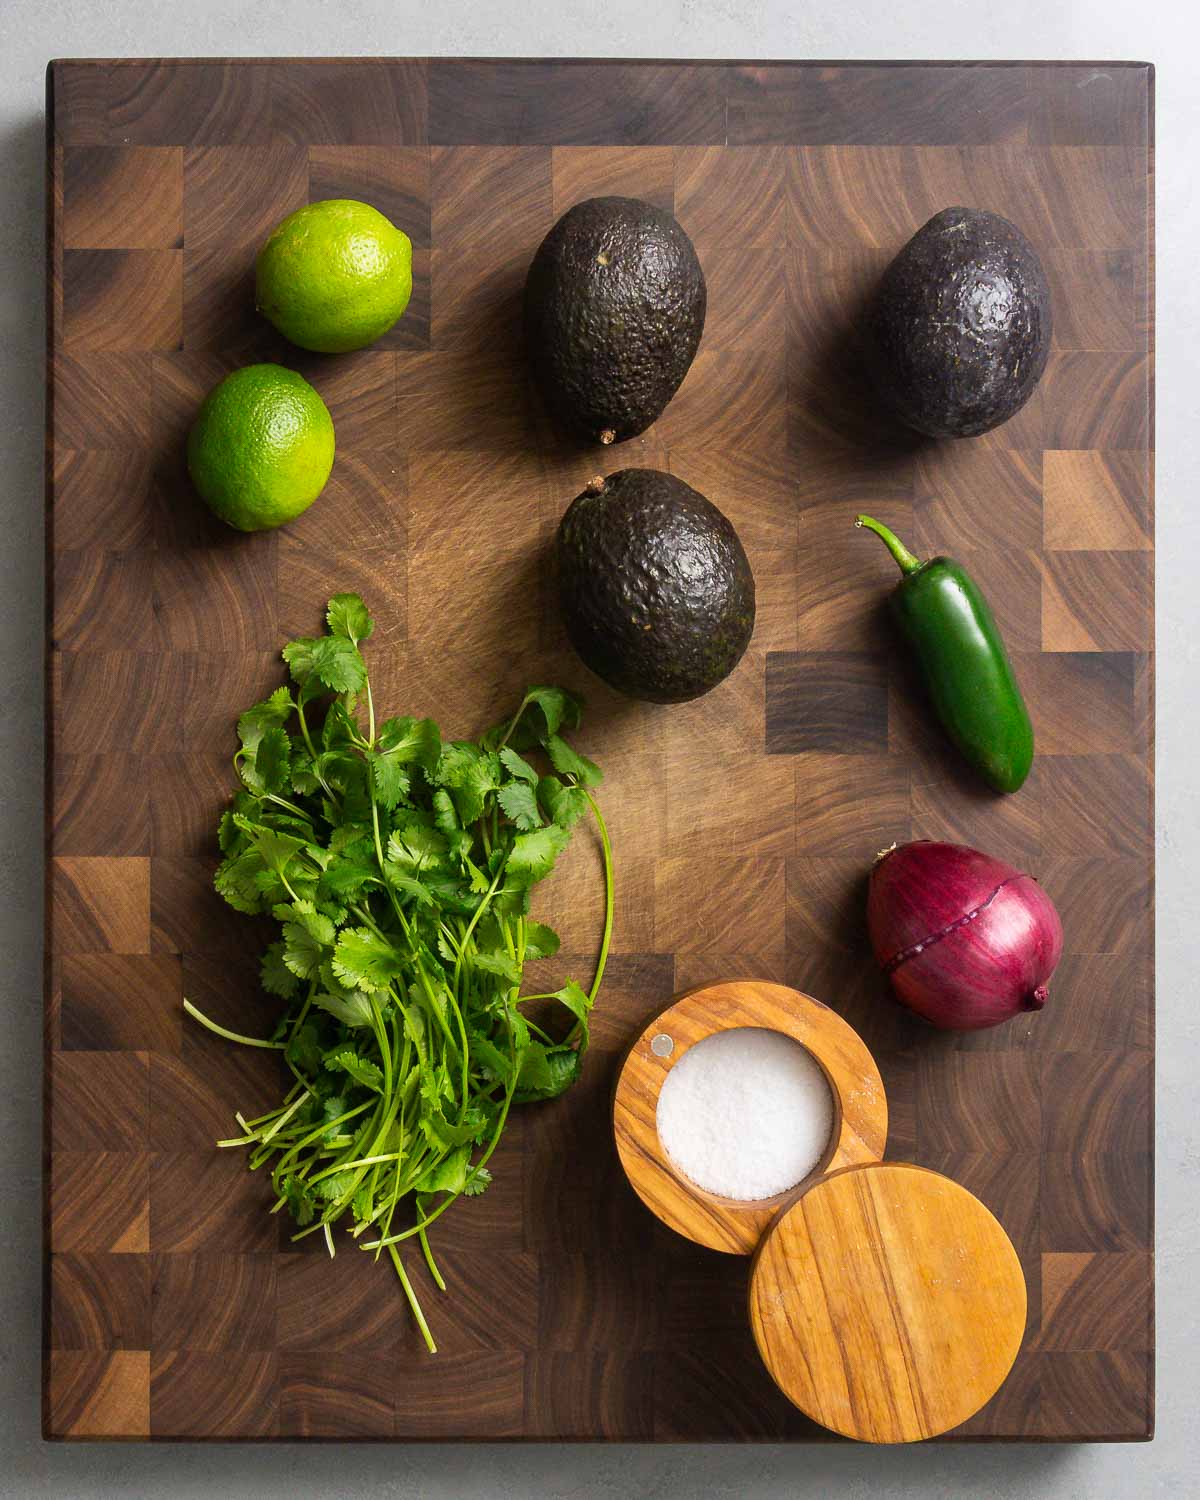 Ingredients shown: limes, avocados, jalapeno pepper, cilantro, onion, and salt.